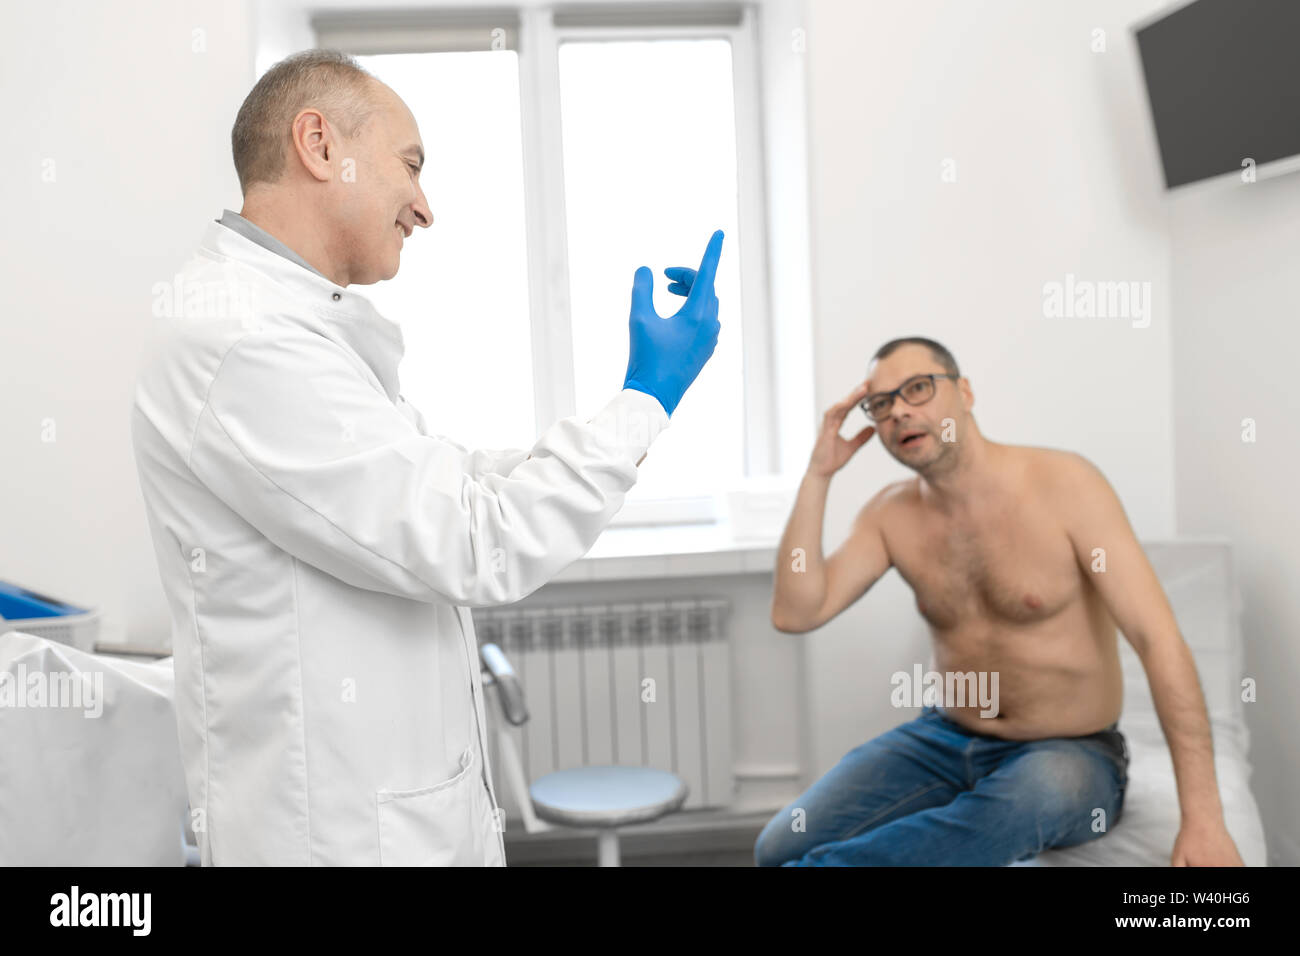 Doctor urologist puts a medical glove on the arm to examine the patient's prostate, prostate massage, lymphatic drainage. Stock Photo